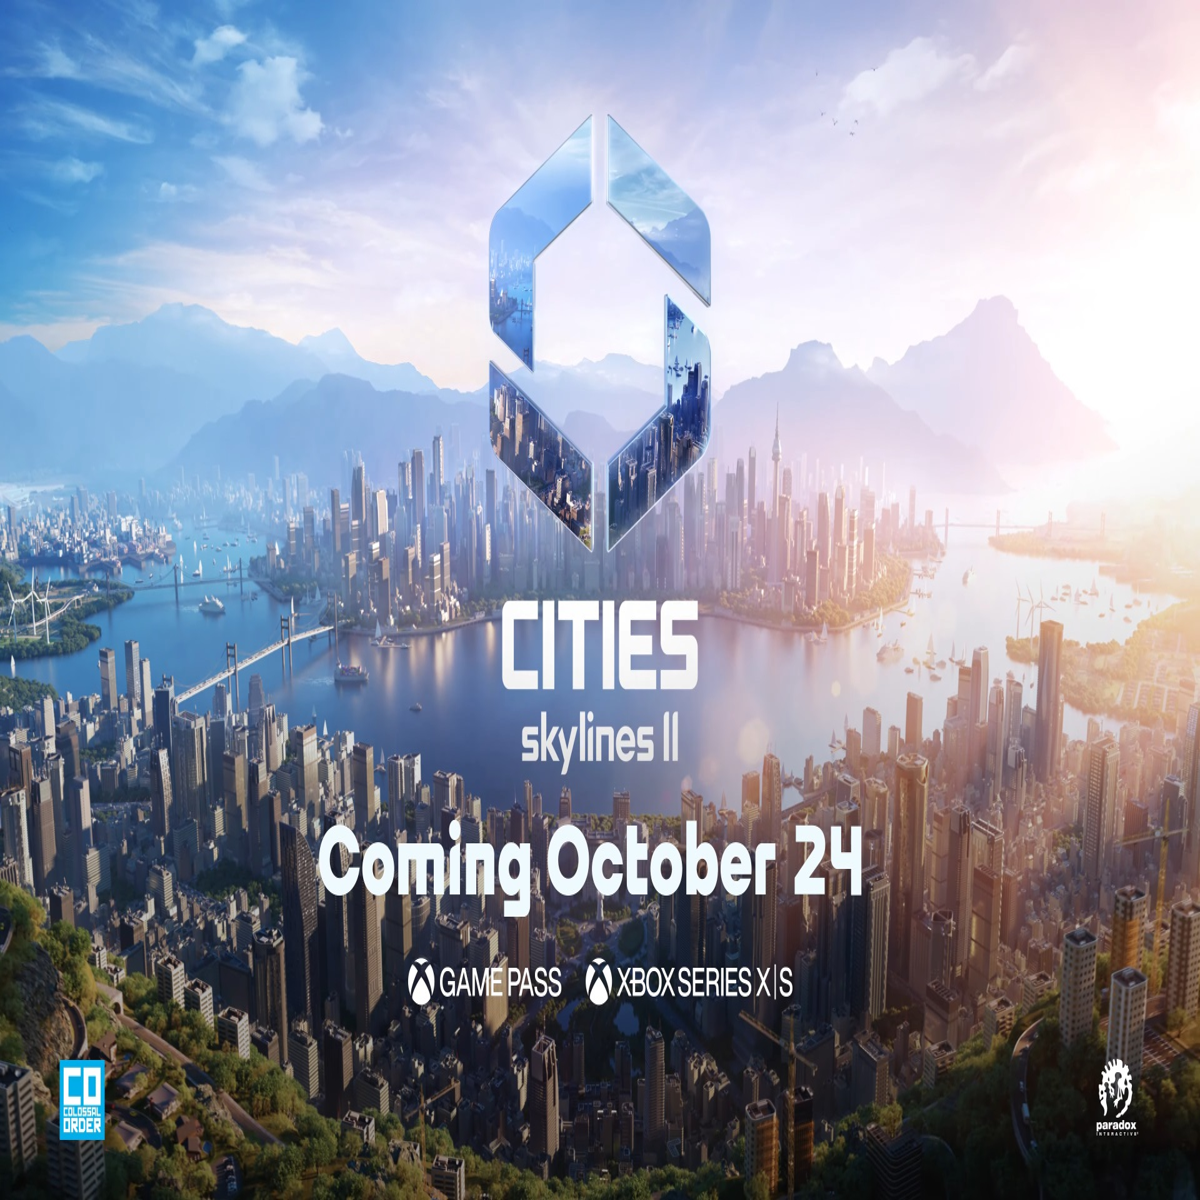 Cities Skylines 2 release date, trailer and latest news